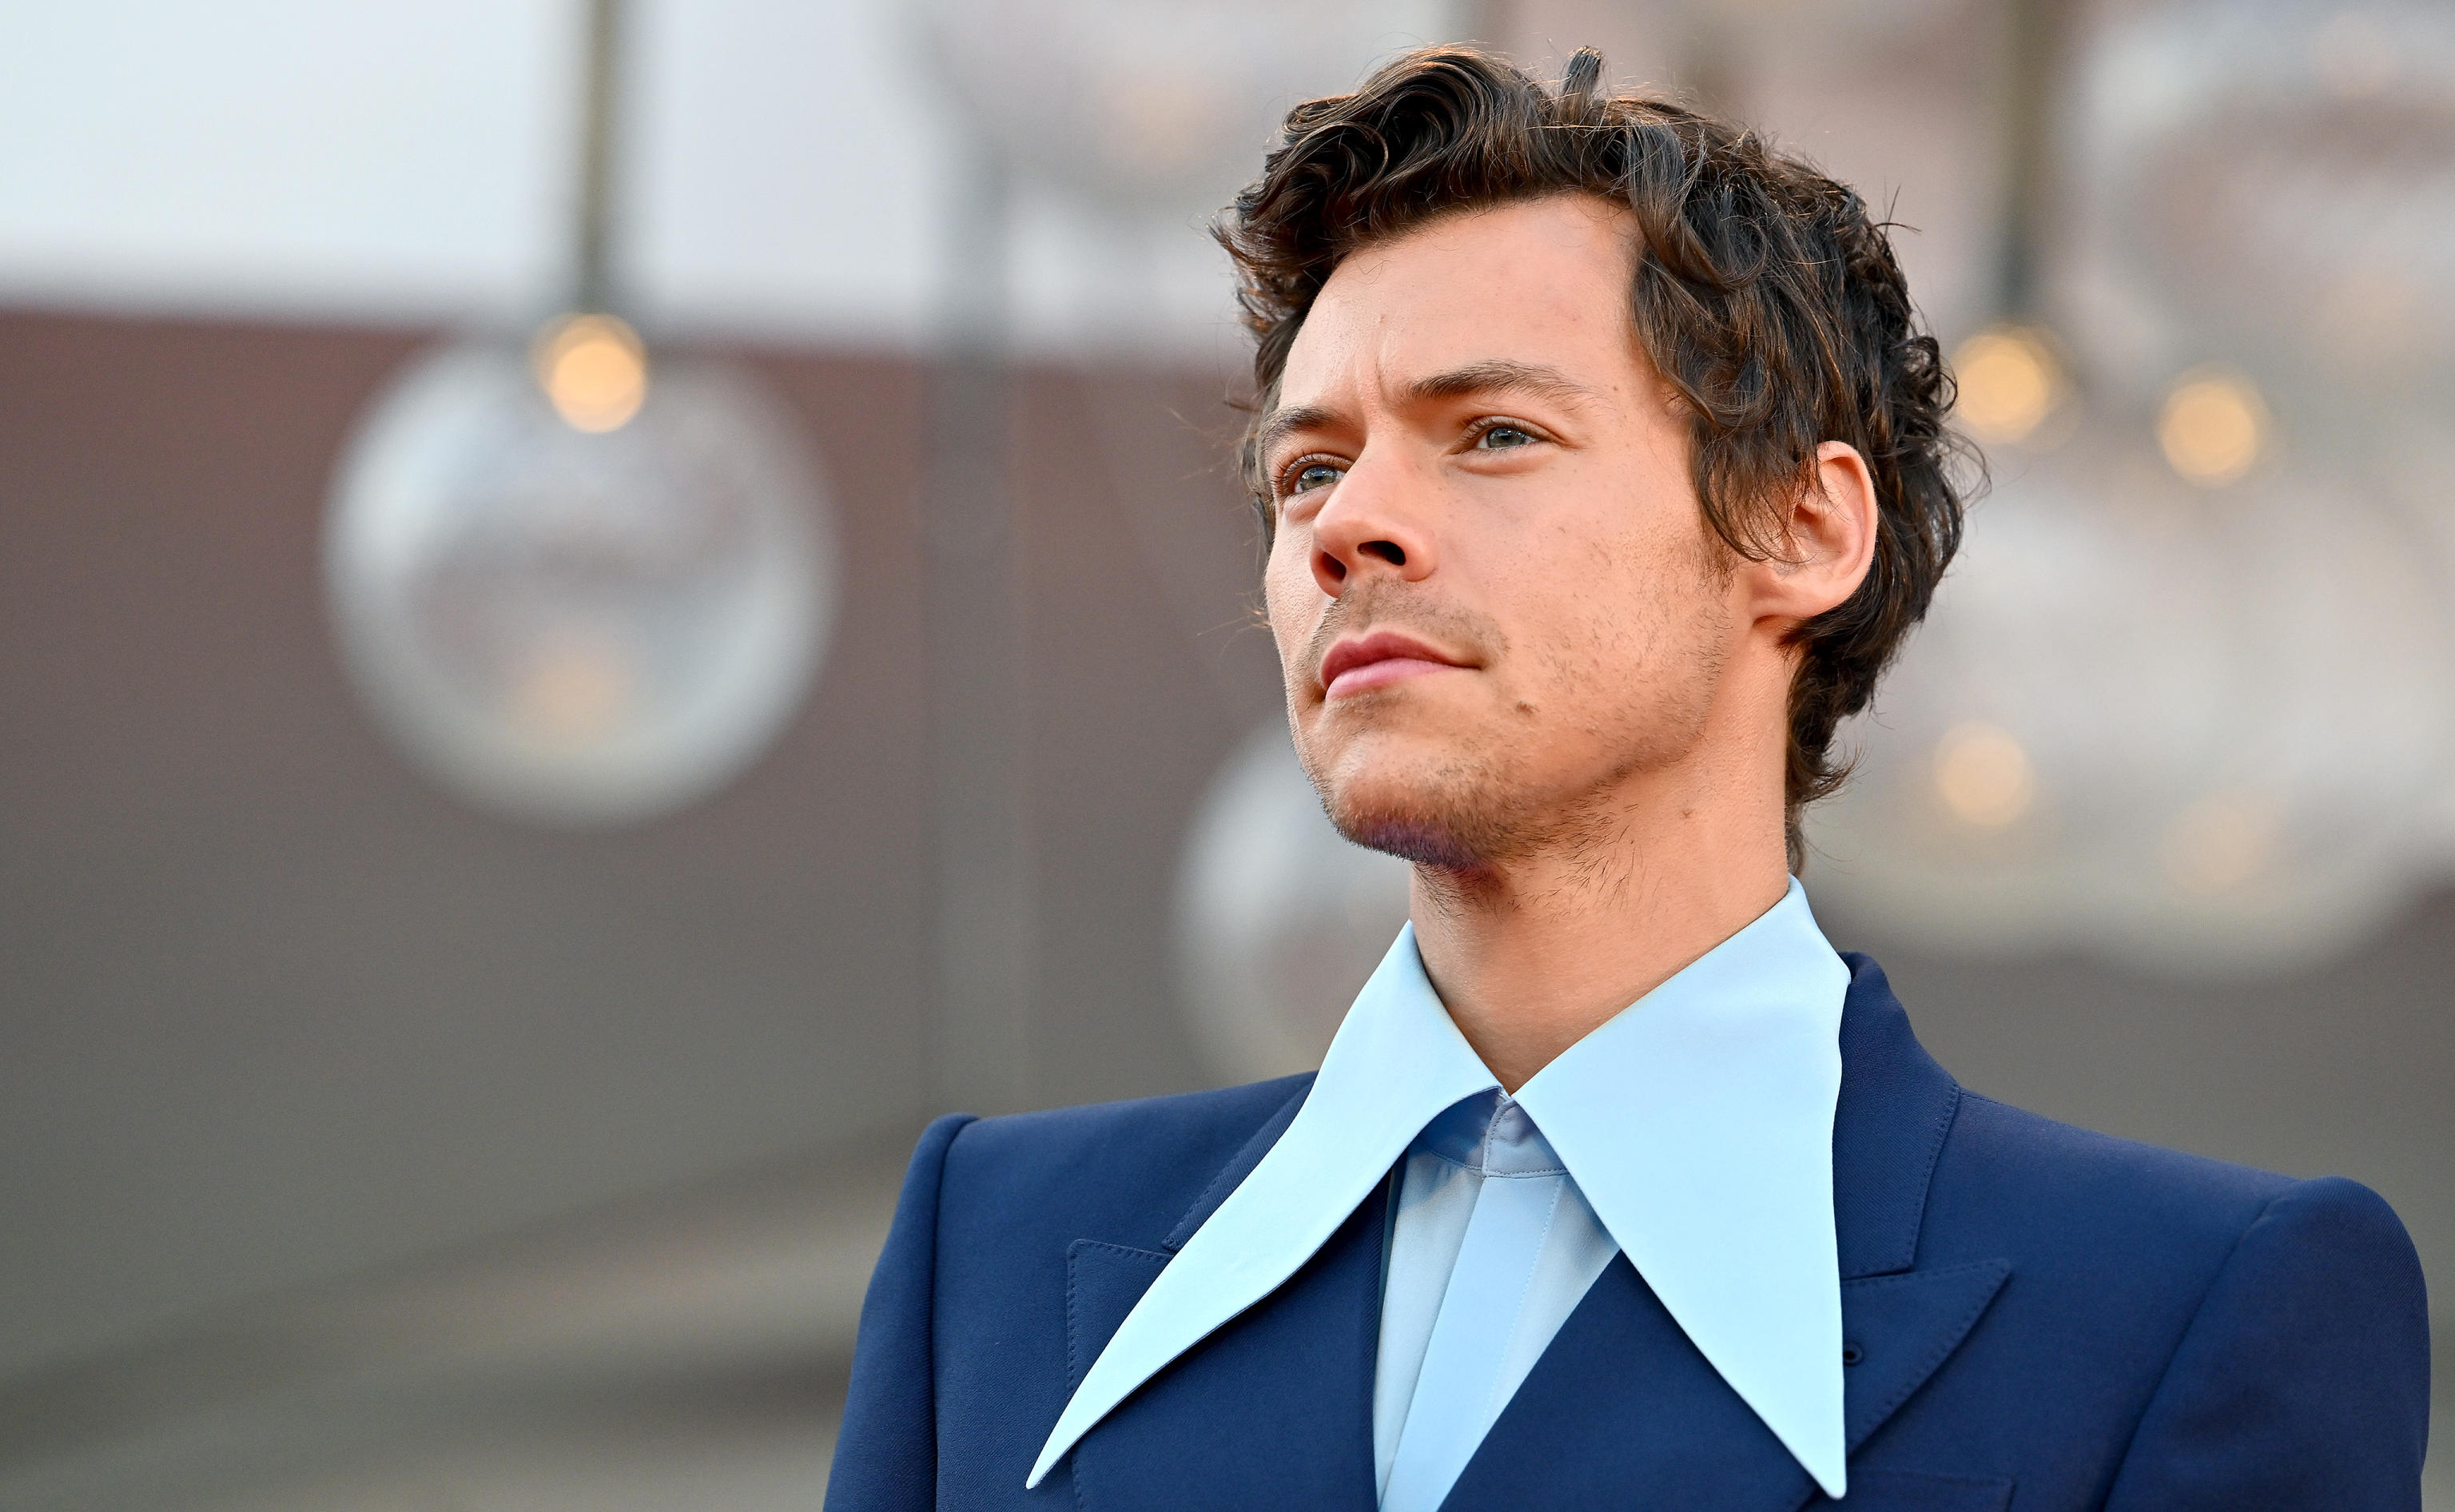 Harry Styles Hot Photos On 'Don't Worry Darling' Press Tour